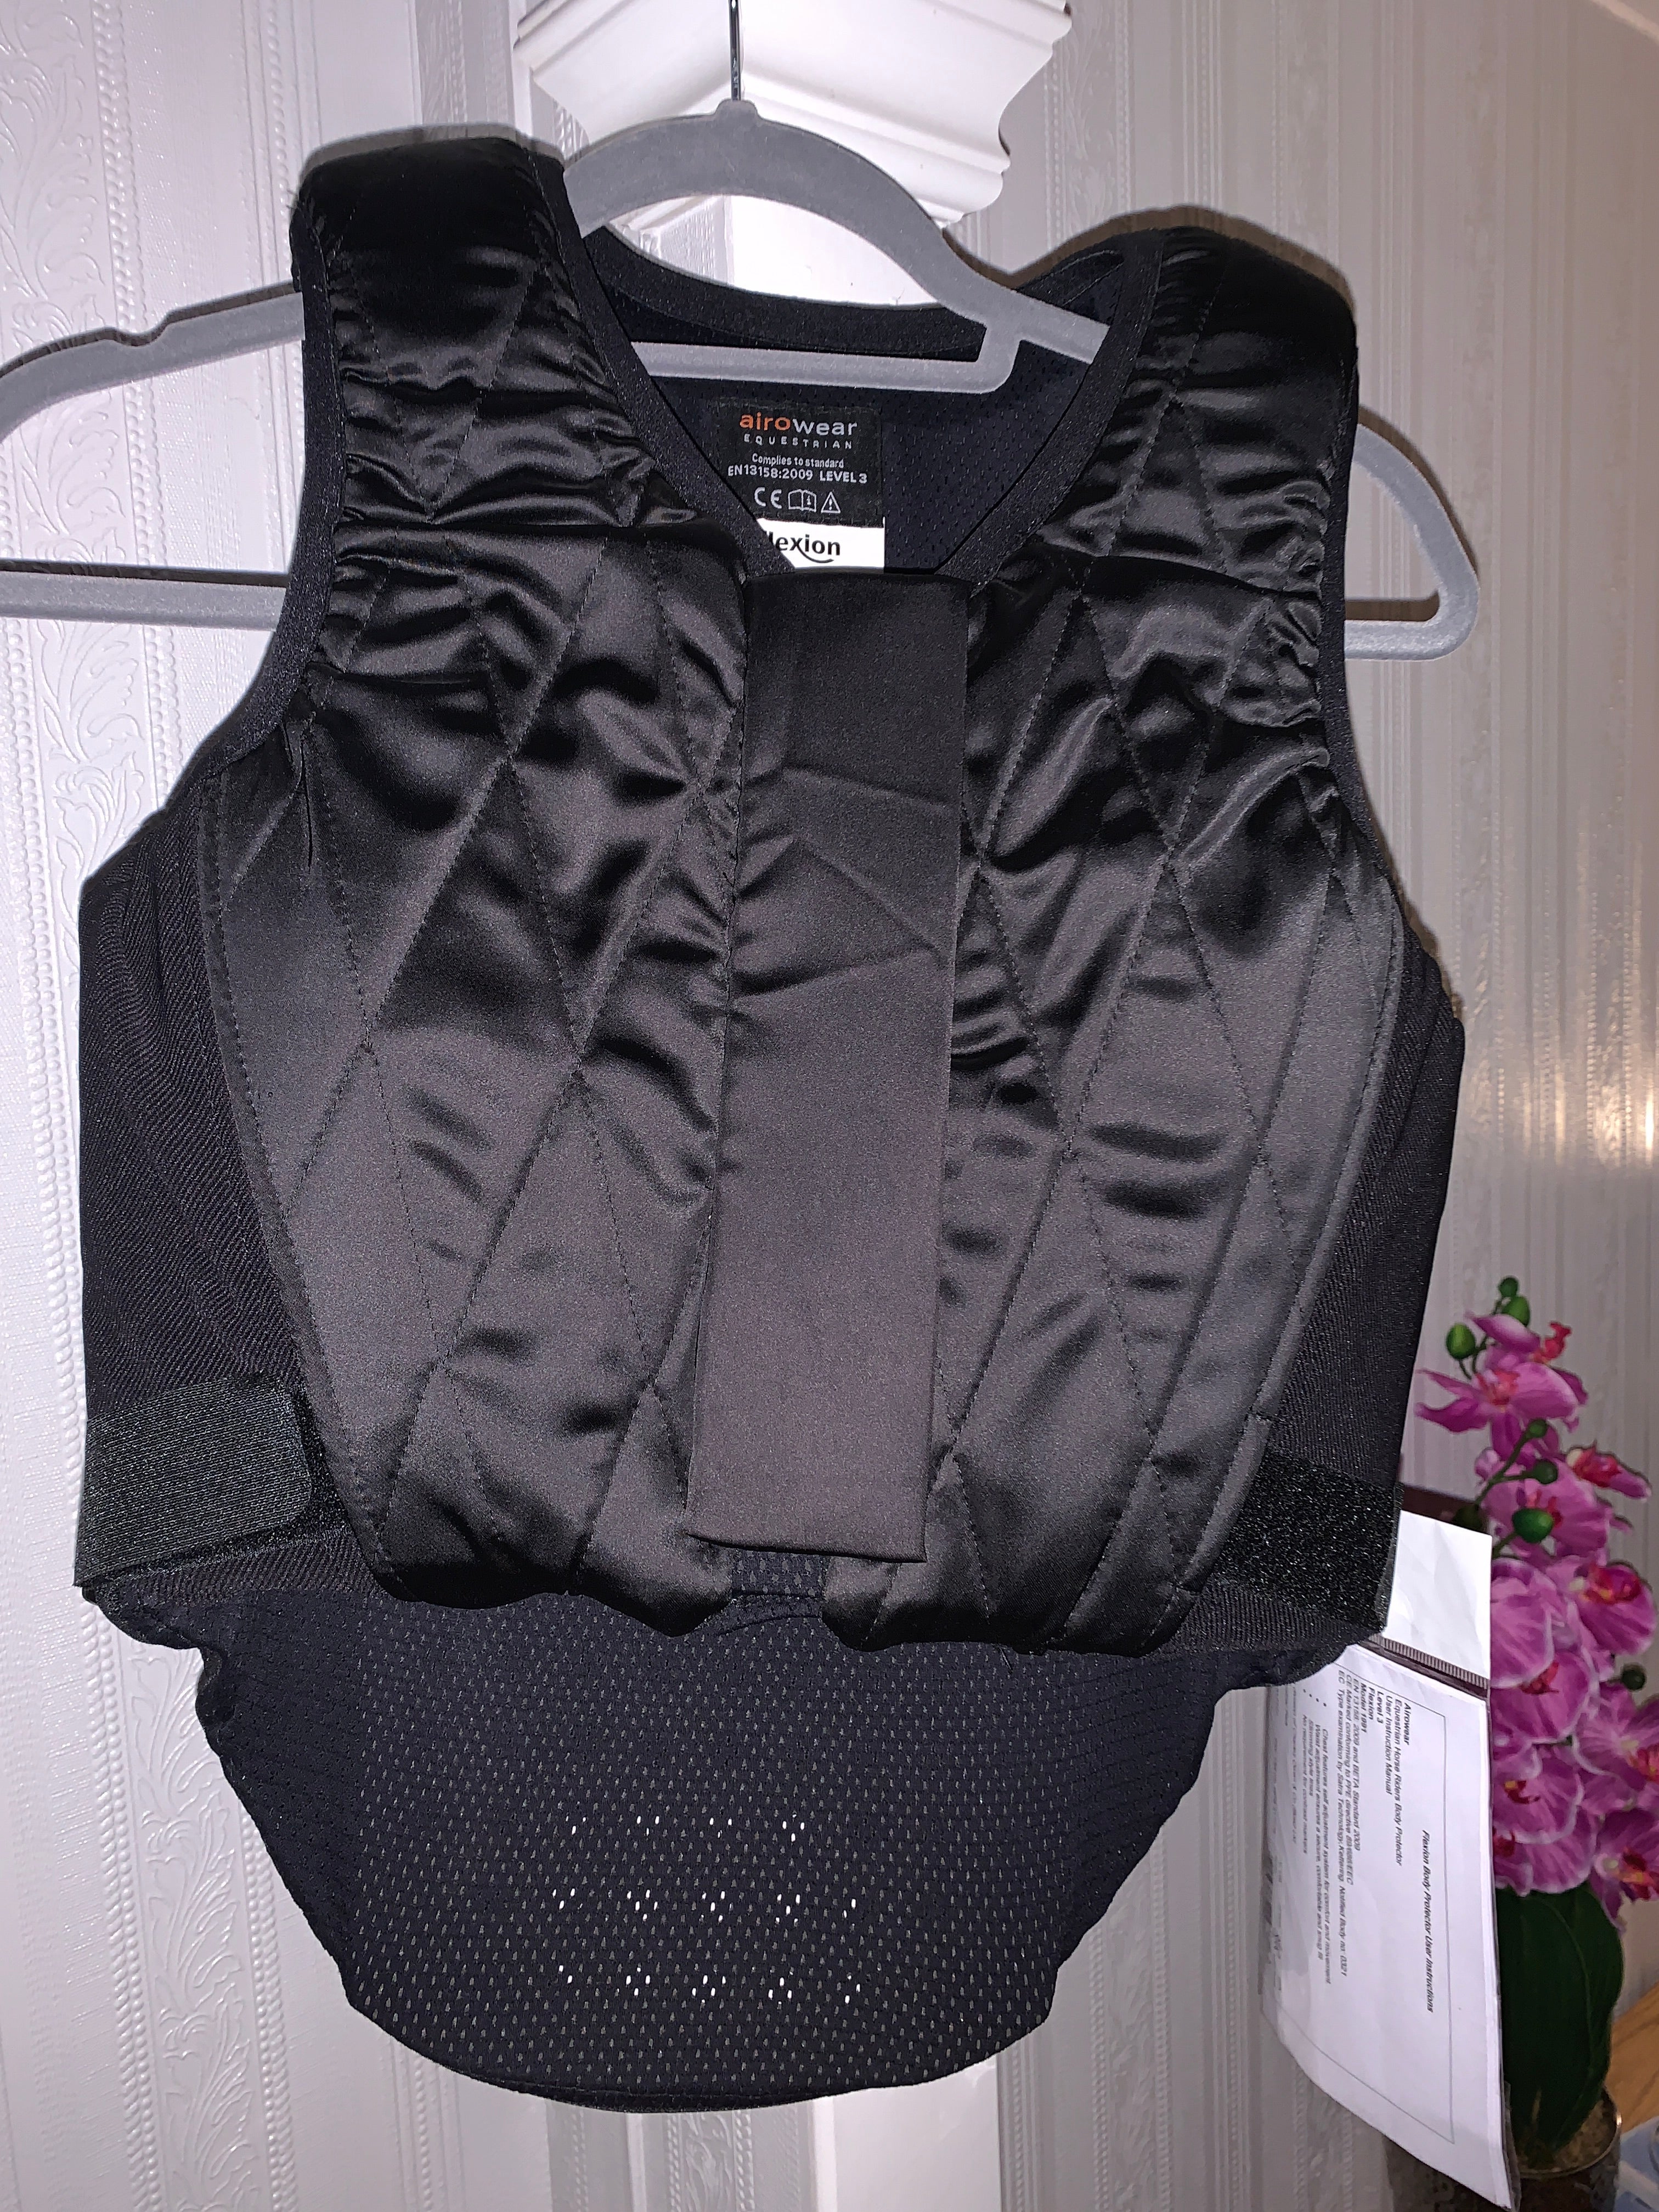 Airowear Flexion Body Protector 2009 - Brand New - Free Delivery 🚚